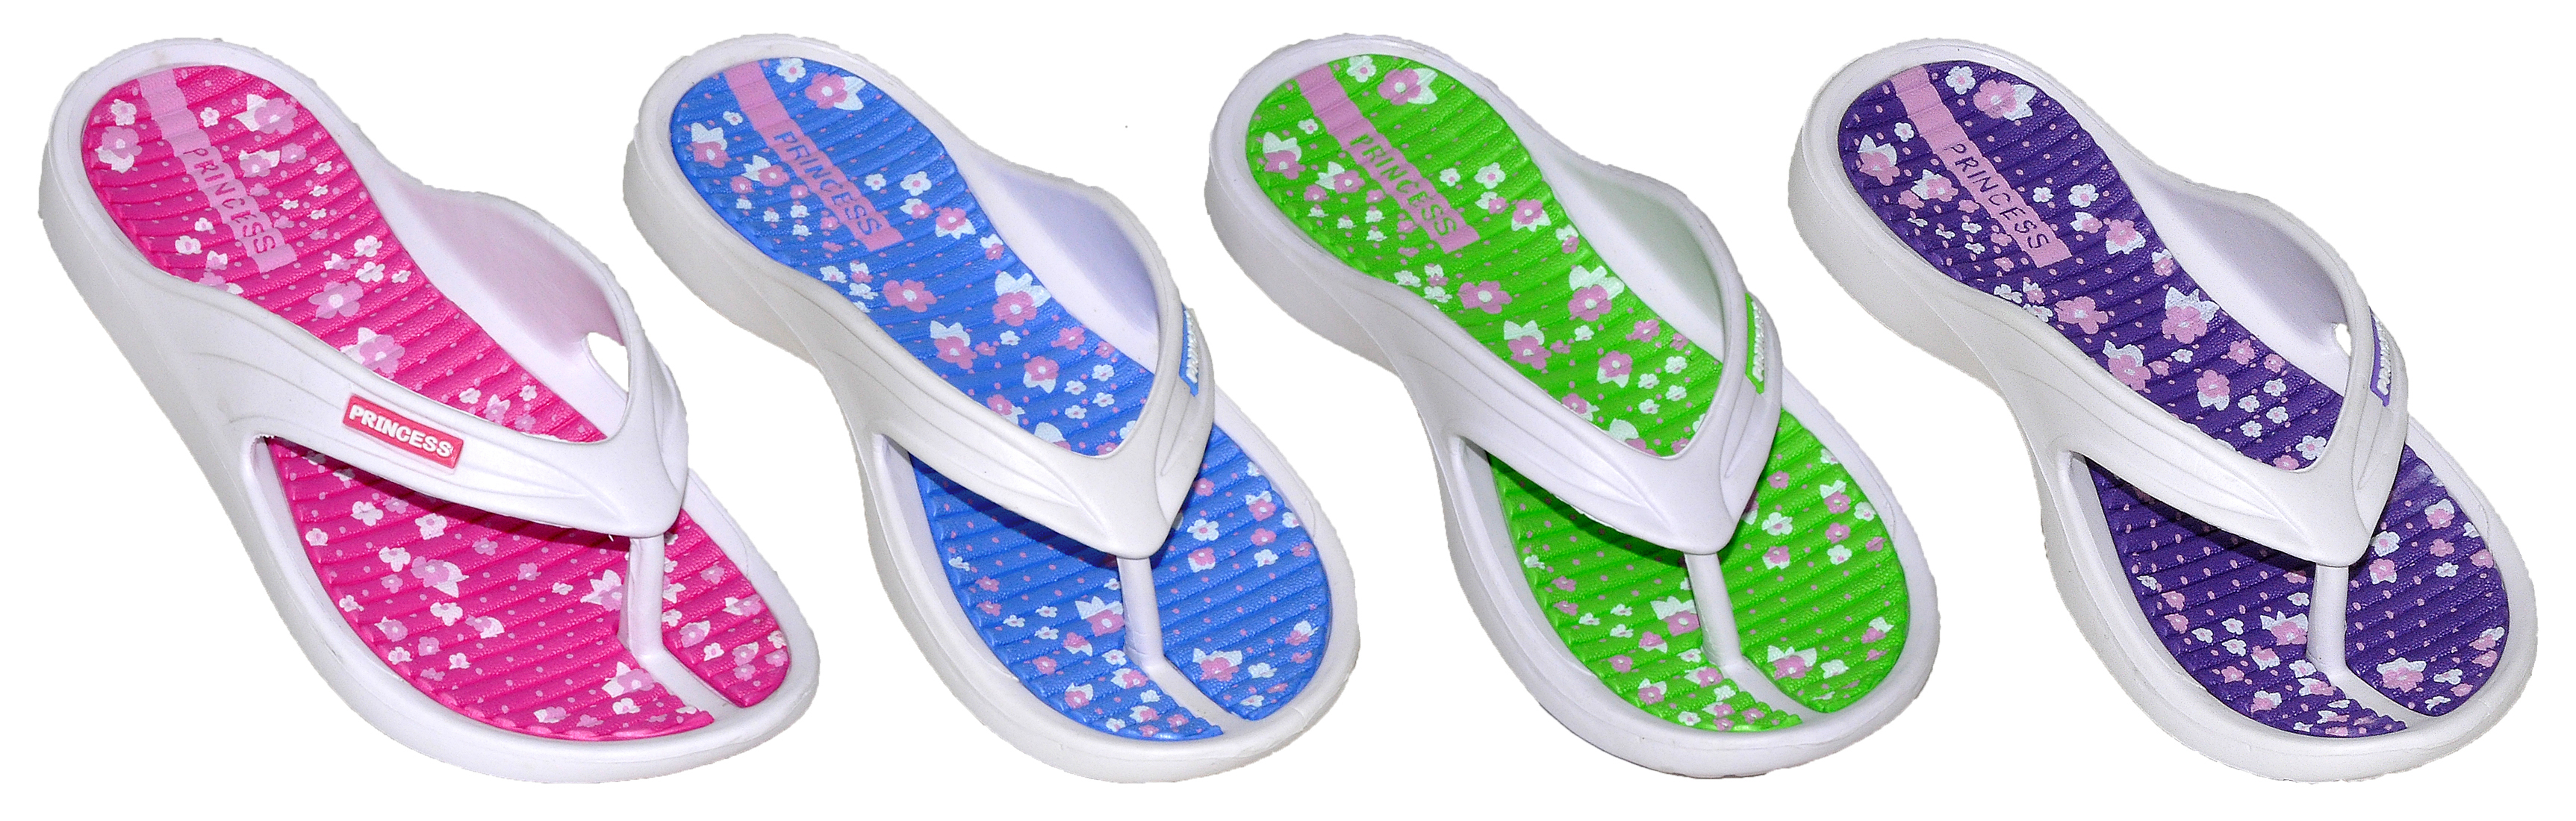 Girl's FLIP FLOPS w/ Floral Footbed - Assorted Colors - Sizes 11/12-4